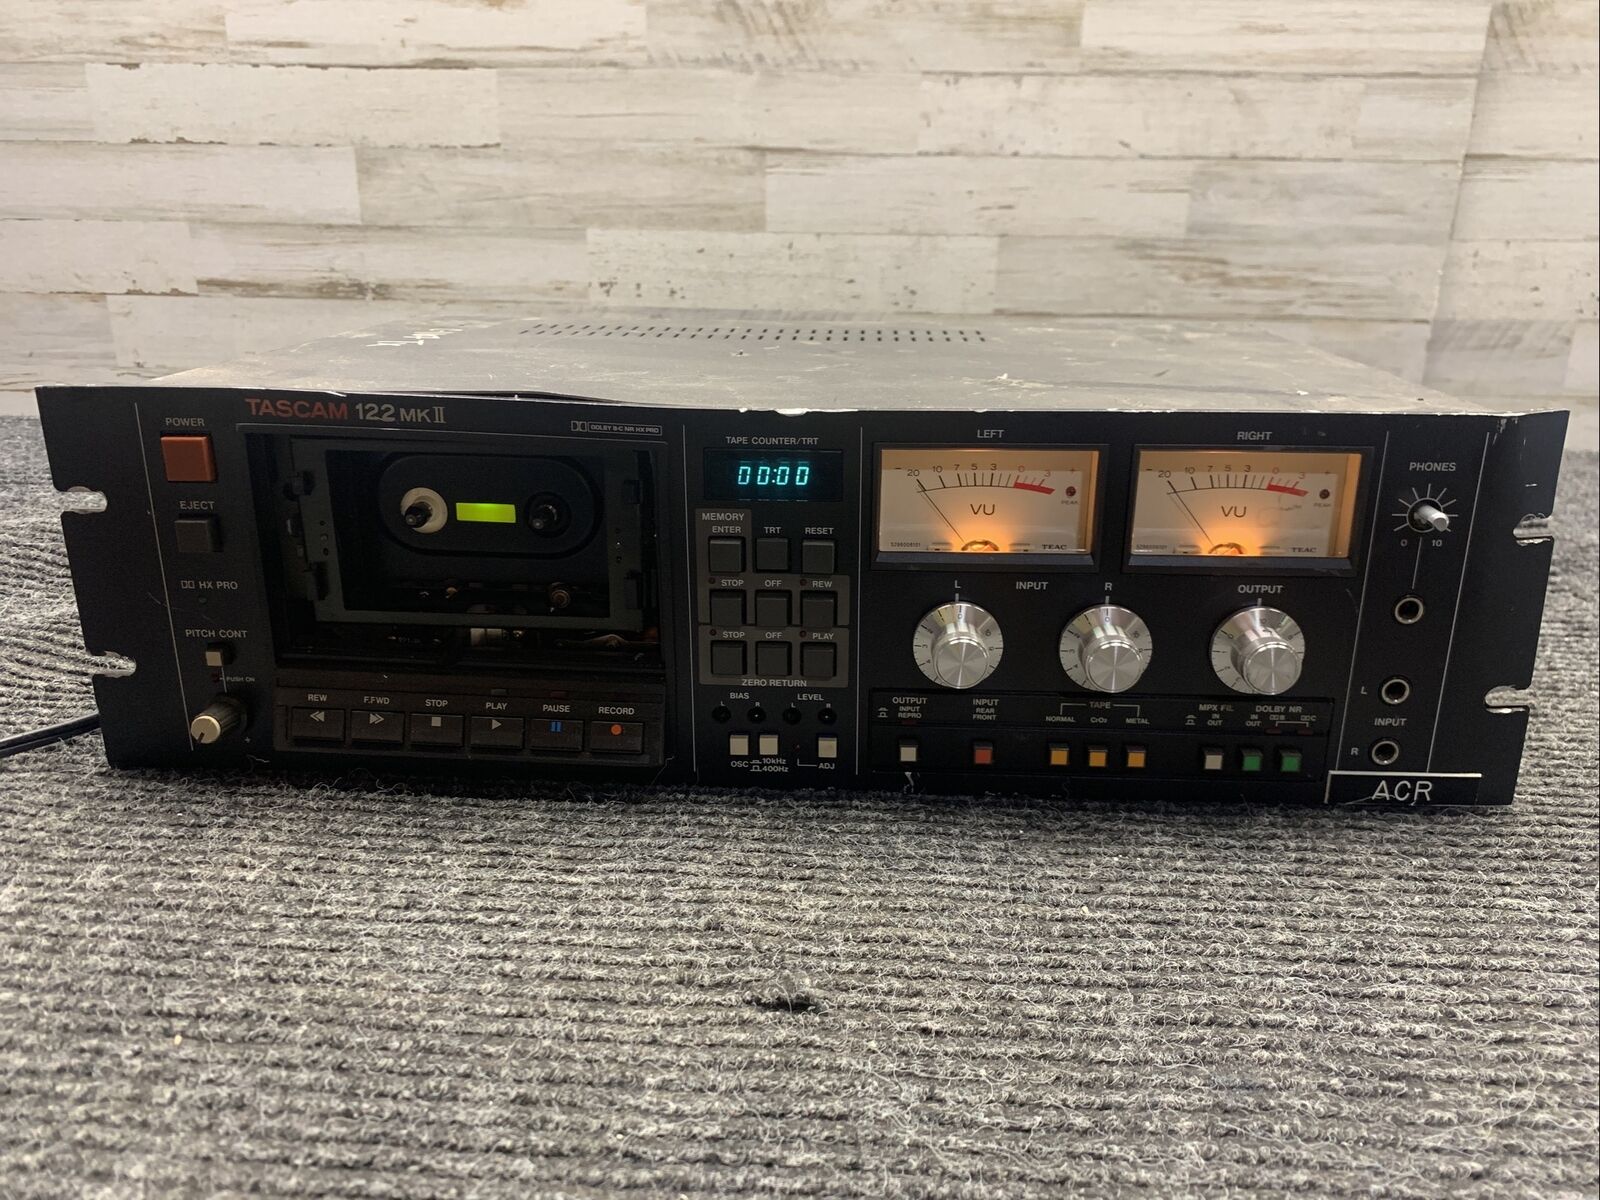 Used Tascam 122 Mkii 3 Head Professional Cassette Deck